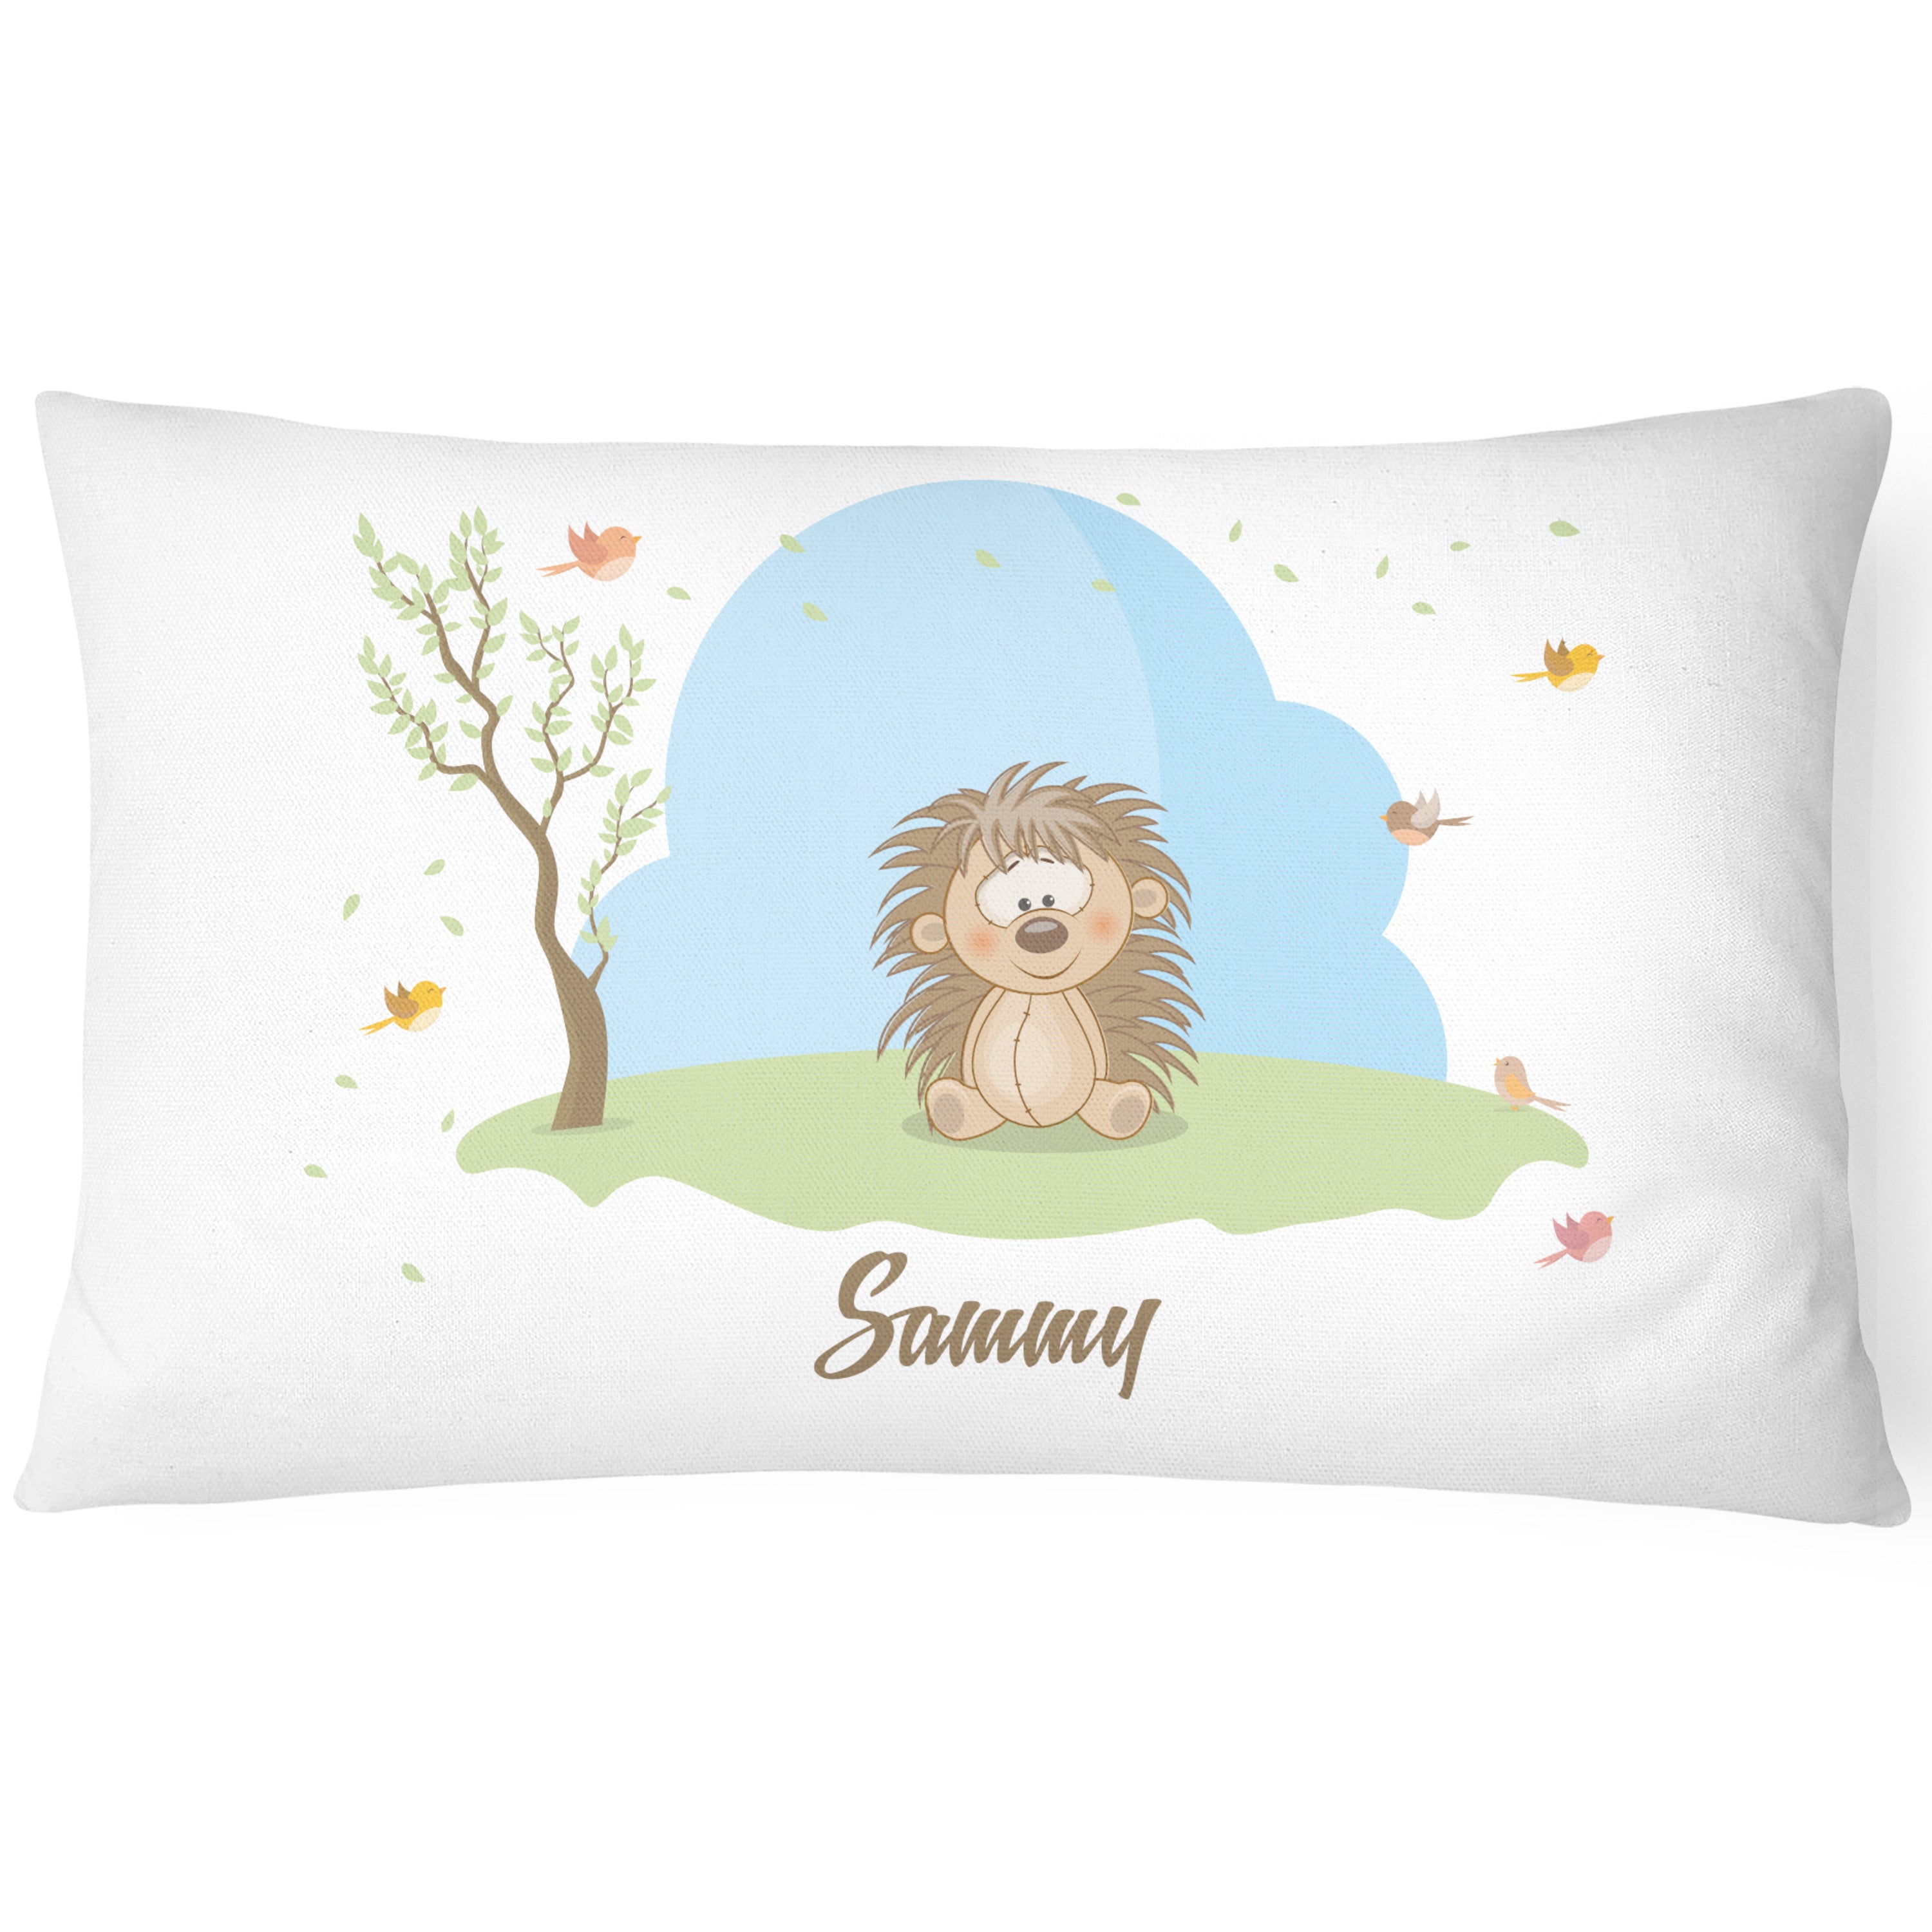 Personalised Children's Pillowcase Cute Animal - Lovable